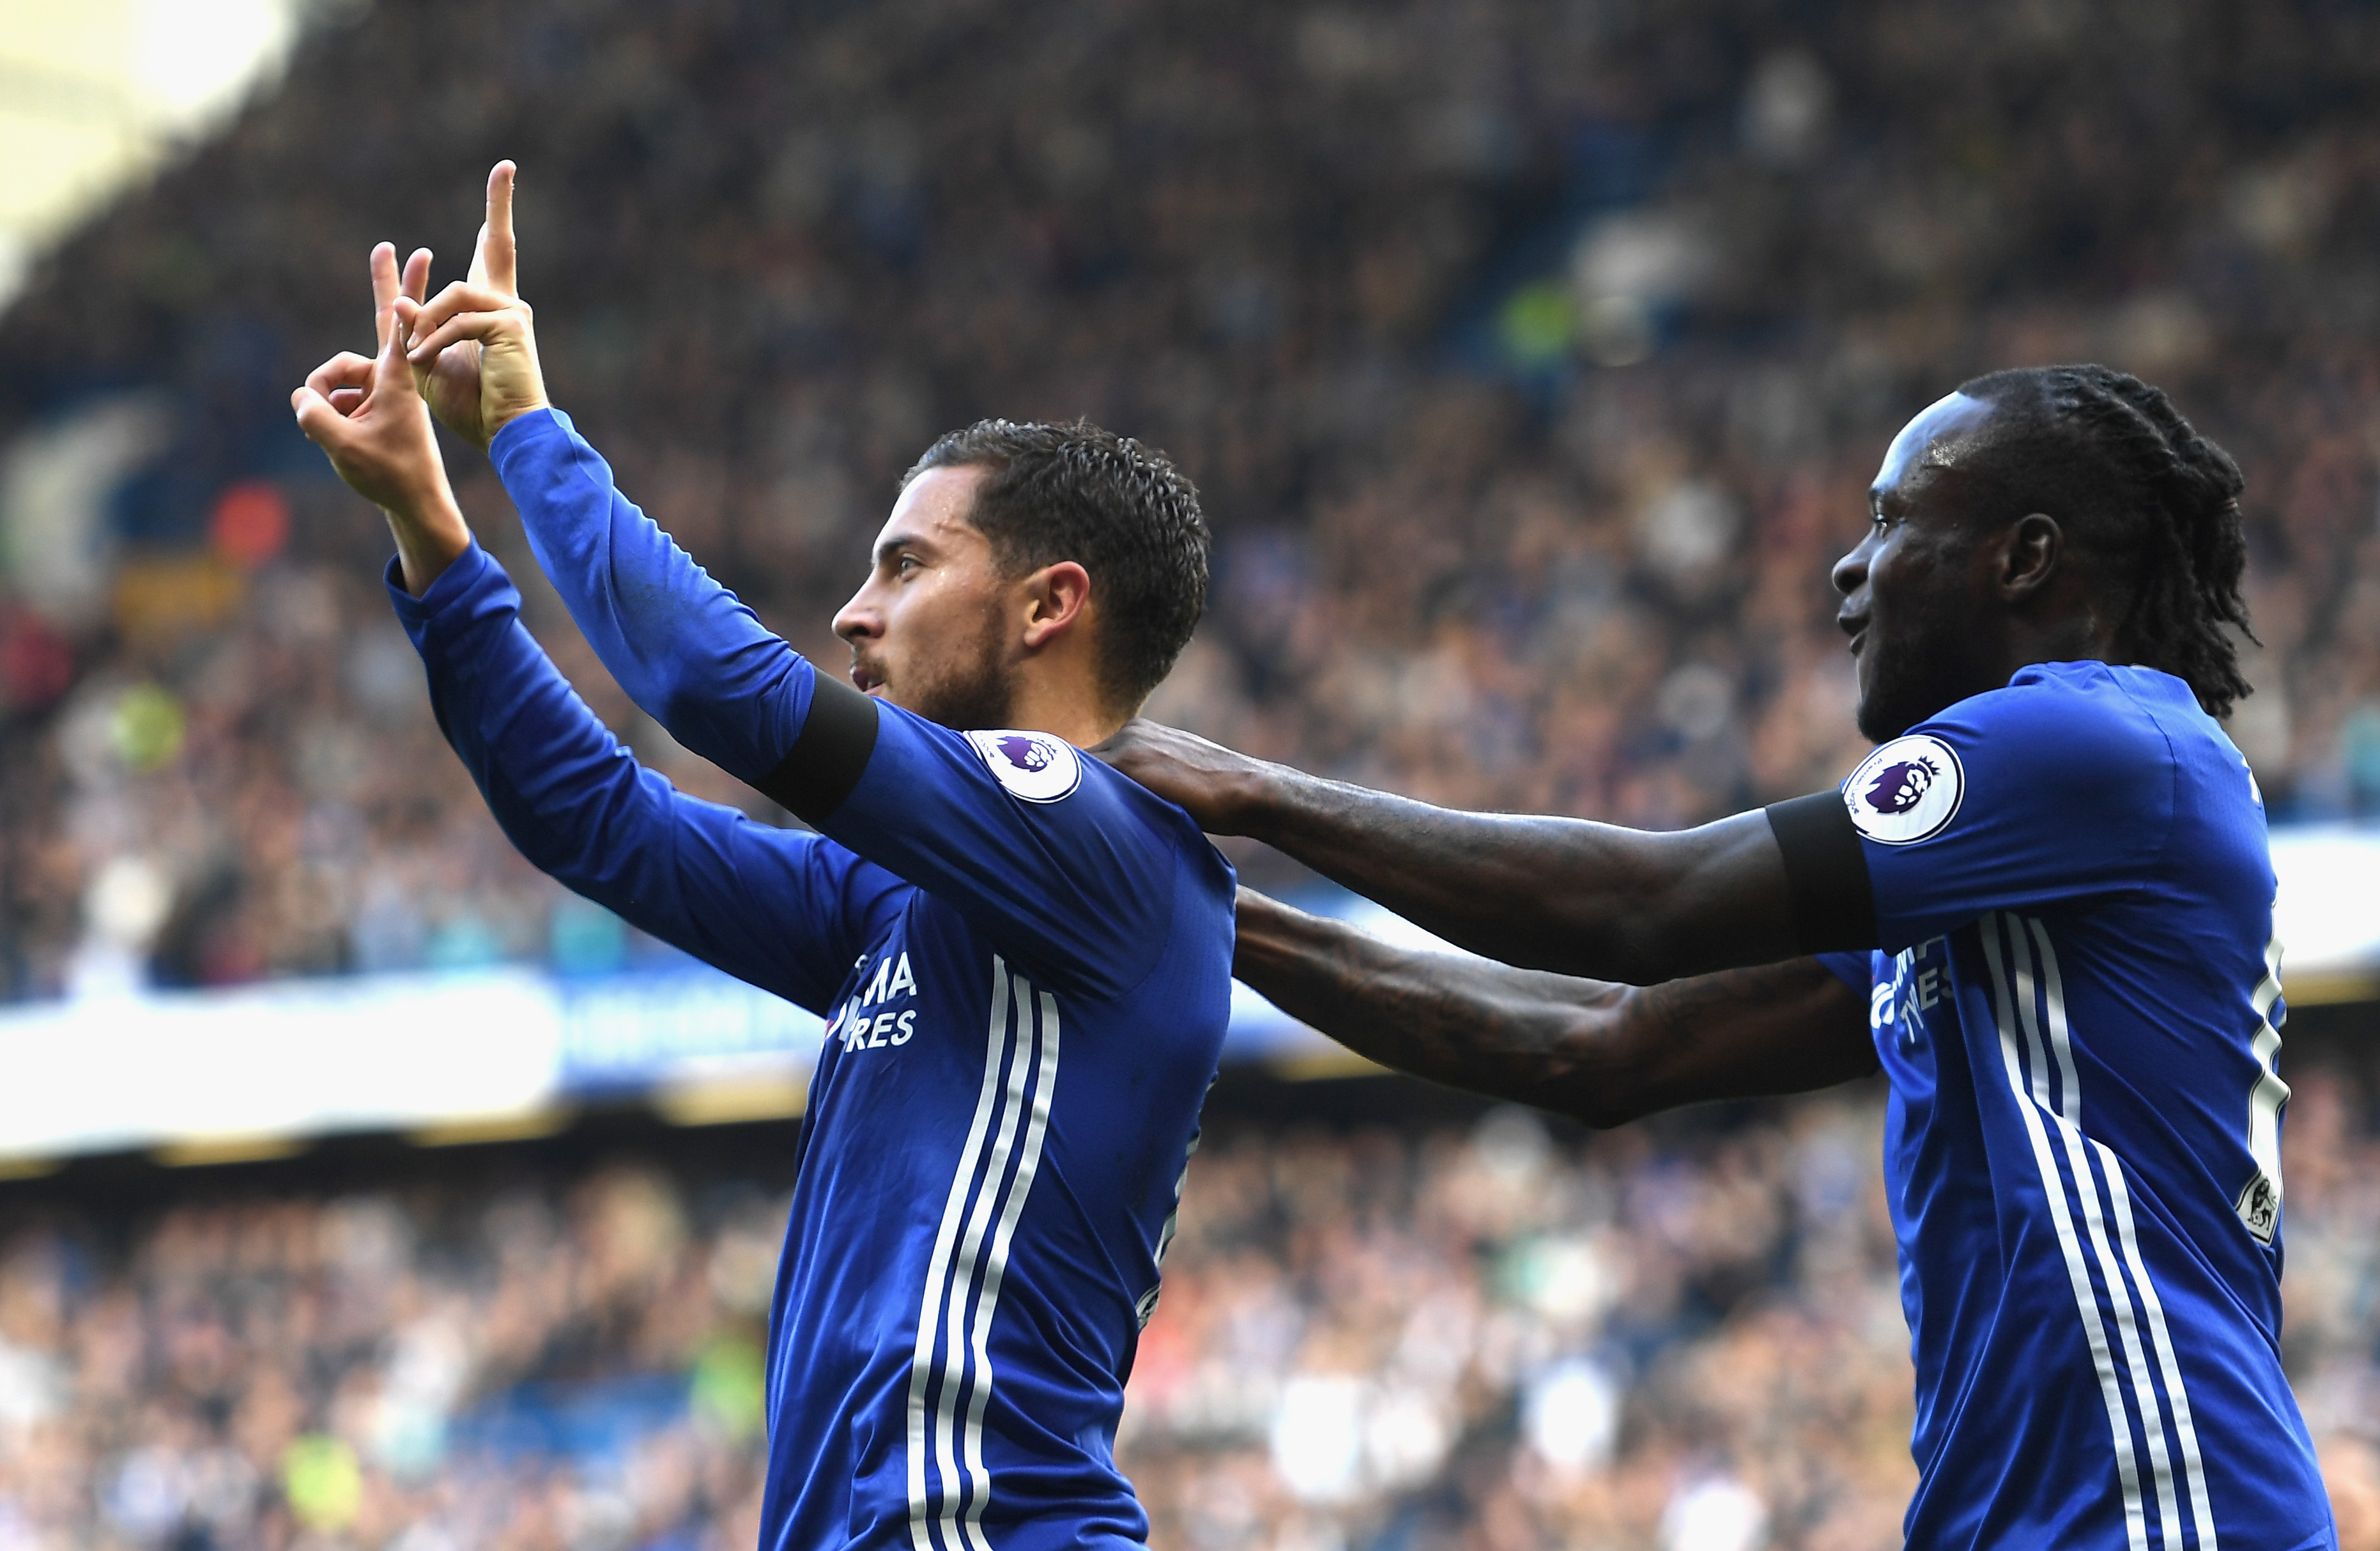 LONDON, ENGLAND - OCTOBER 15: Eden Hazard of Chelsea (L) celebrates scoring his sides second goal with his team mate Victor Moses of Chelsea (R)   during the Premier League match between Chelsea and Leicester City at Stamford Bridge on October 15, 2016 in London, England.  (Photo by Shaun Botterill/Getty Images)